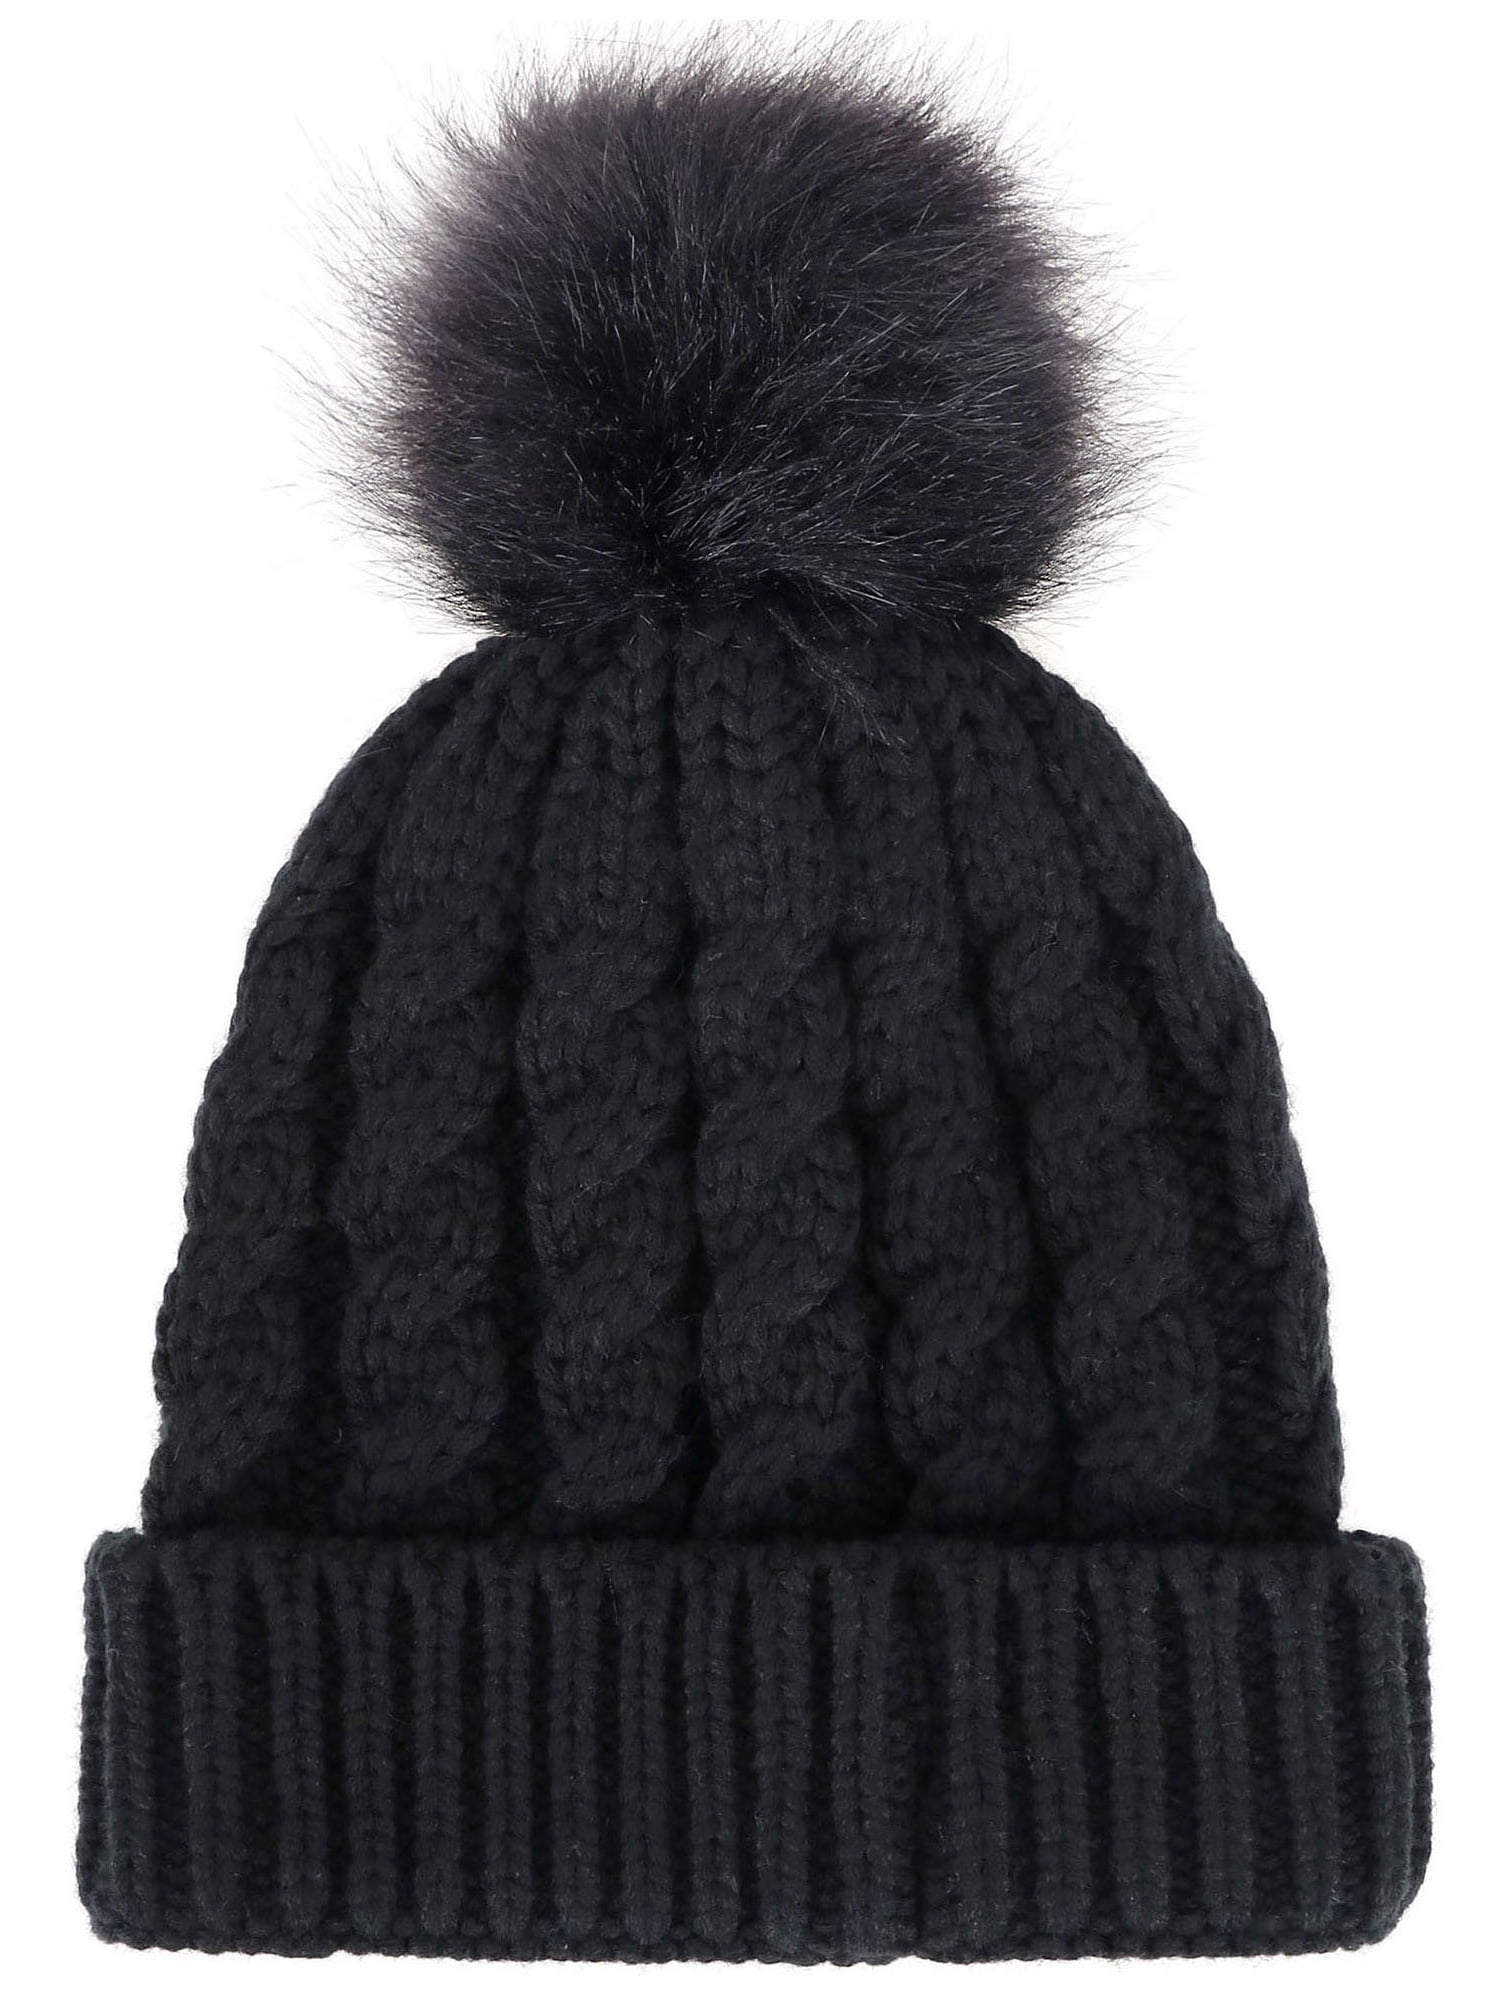 QIMOUSE Solid Color Knitted Beanie Hat With Pom Pom Hat Winter Warm Skull Cap